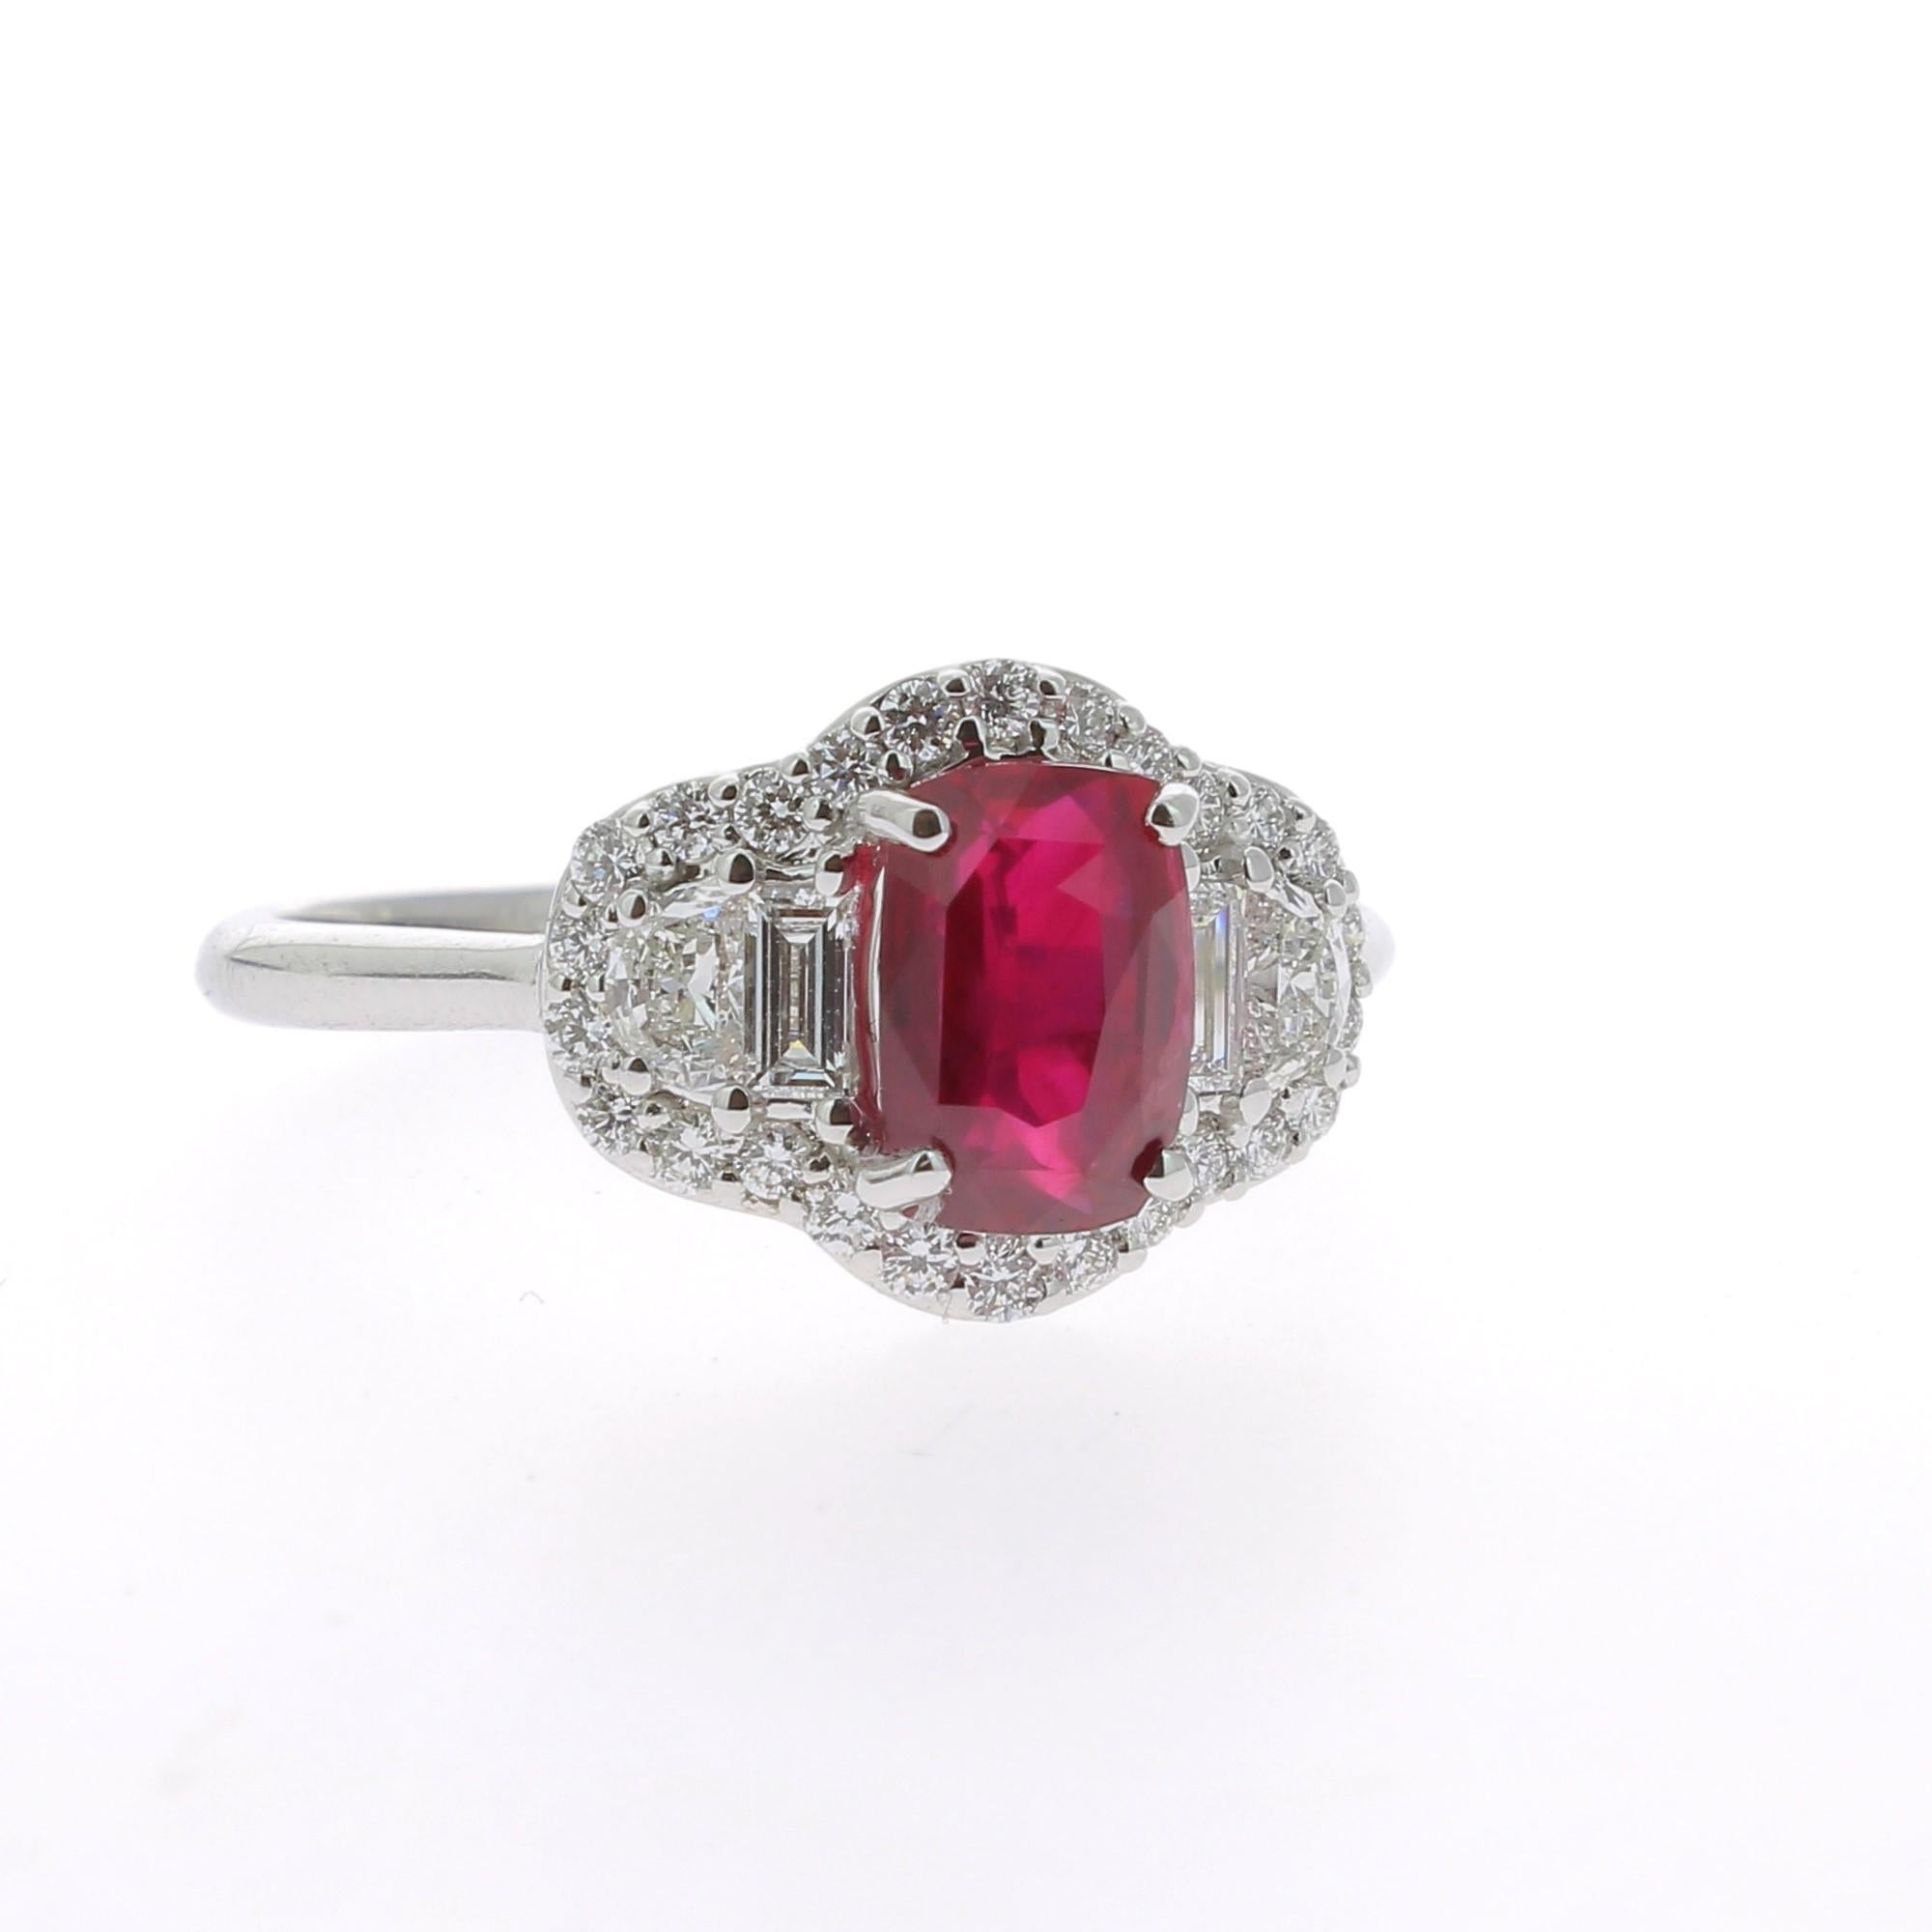 An amazing Ruby Ring flanked on each side by a single Half Moon Diamond, a single Baguette Diamond and surround with round Diamond.
The total weight of the Ruby is 1.72 Carats, the gemstone is certified. 
The Diamond weight is 0.58 Carats.
The Ruby